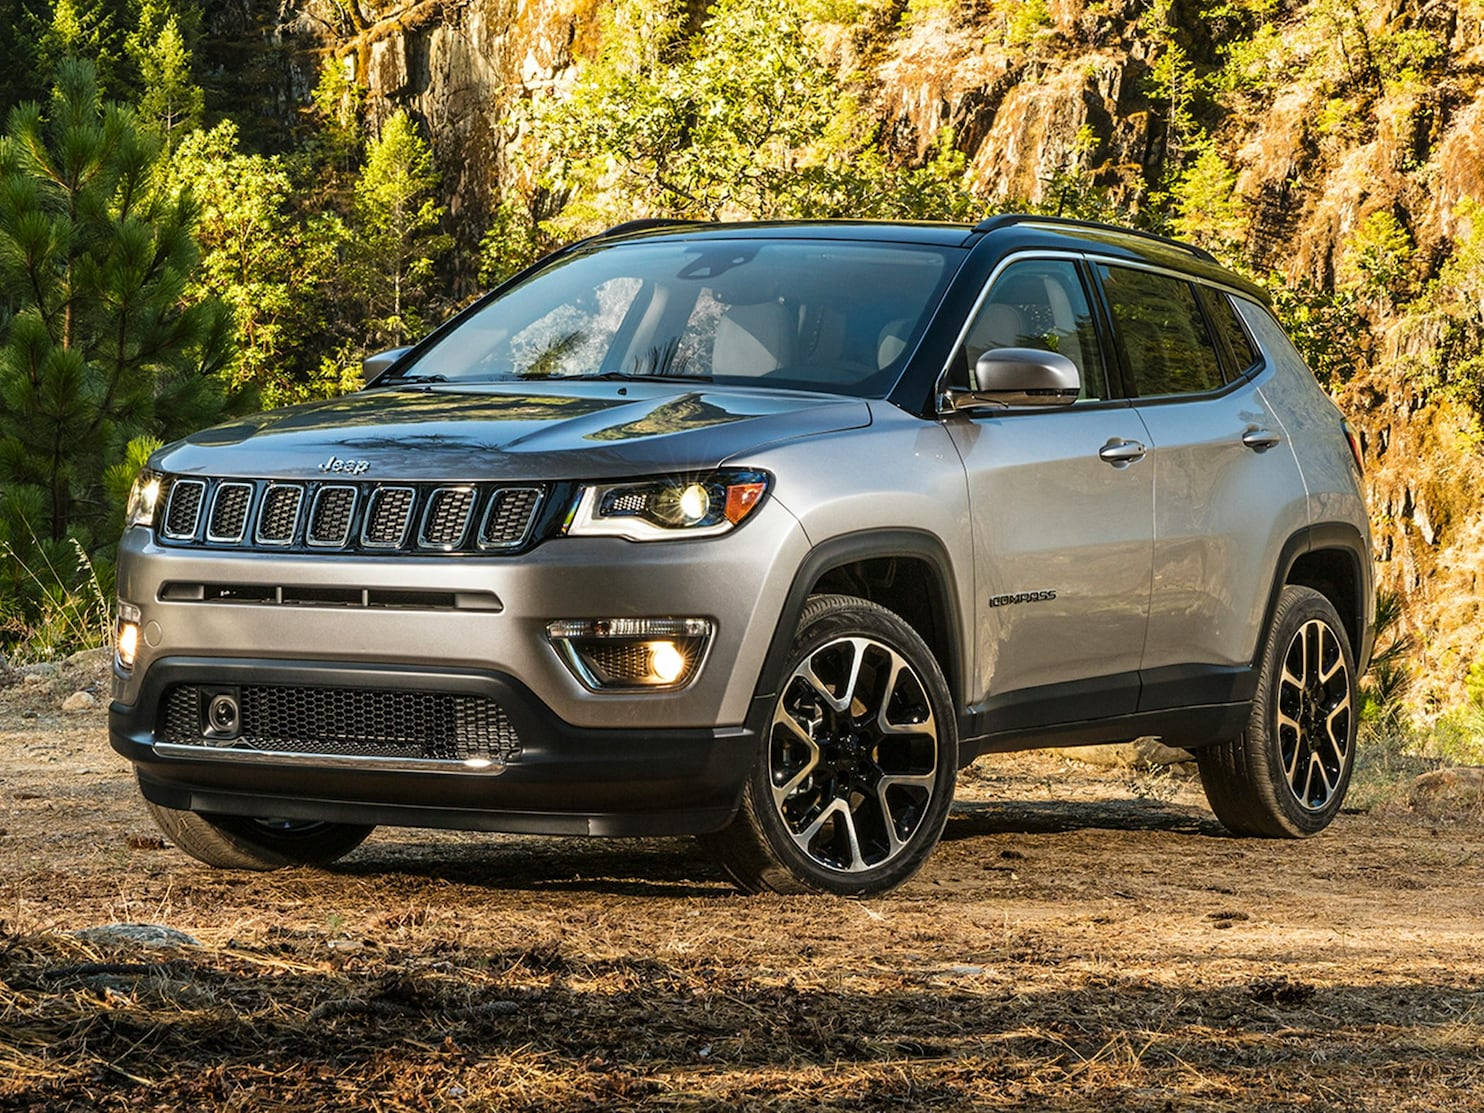 Jeep Compass Gray With Forest Background Wallpaper